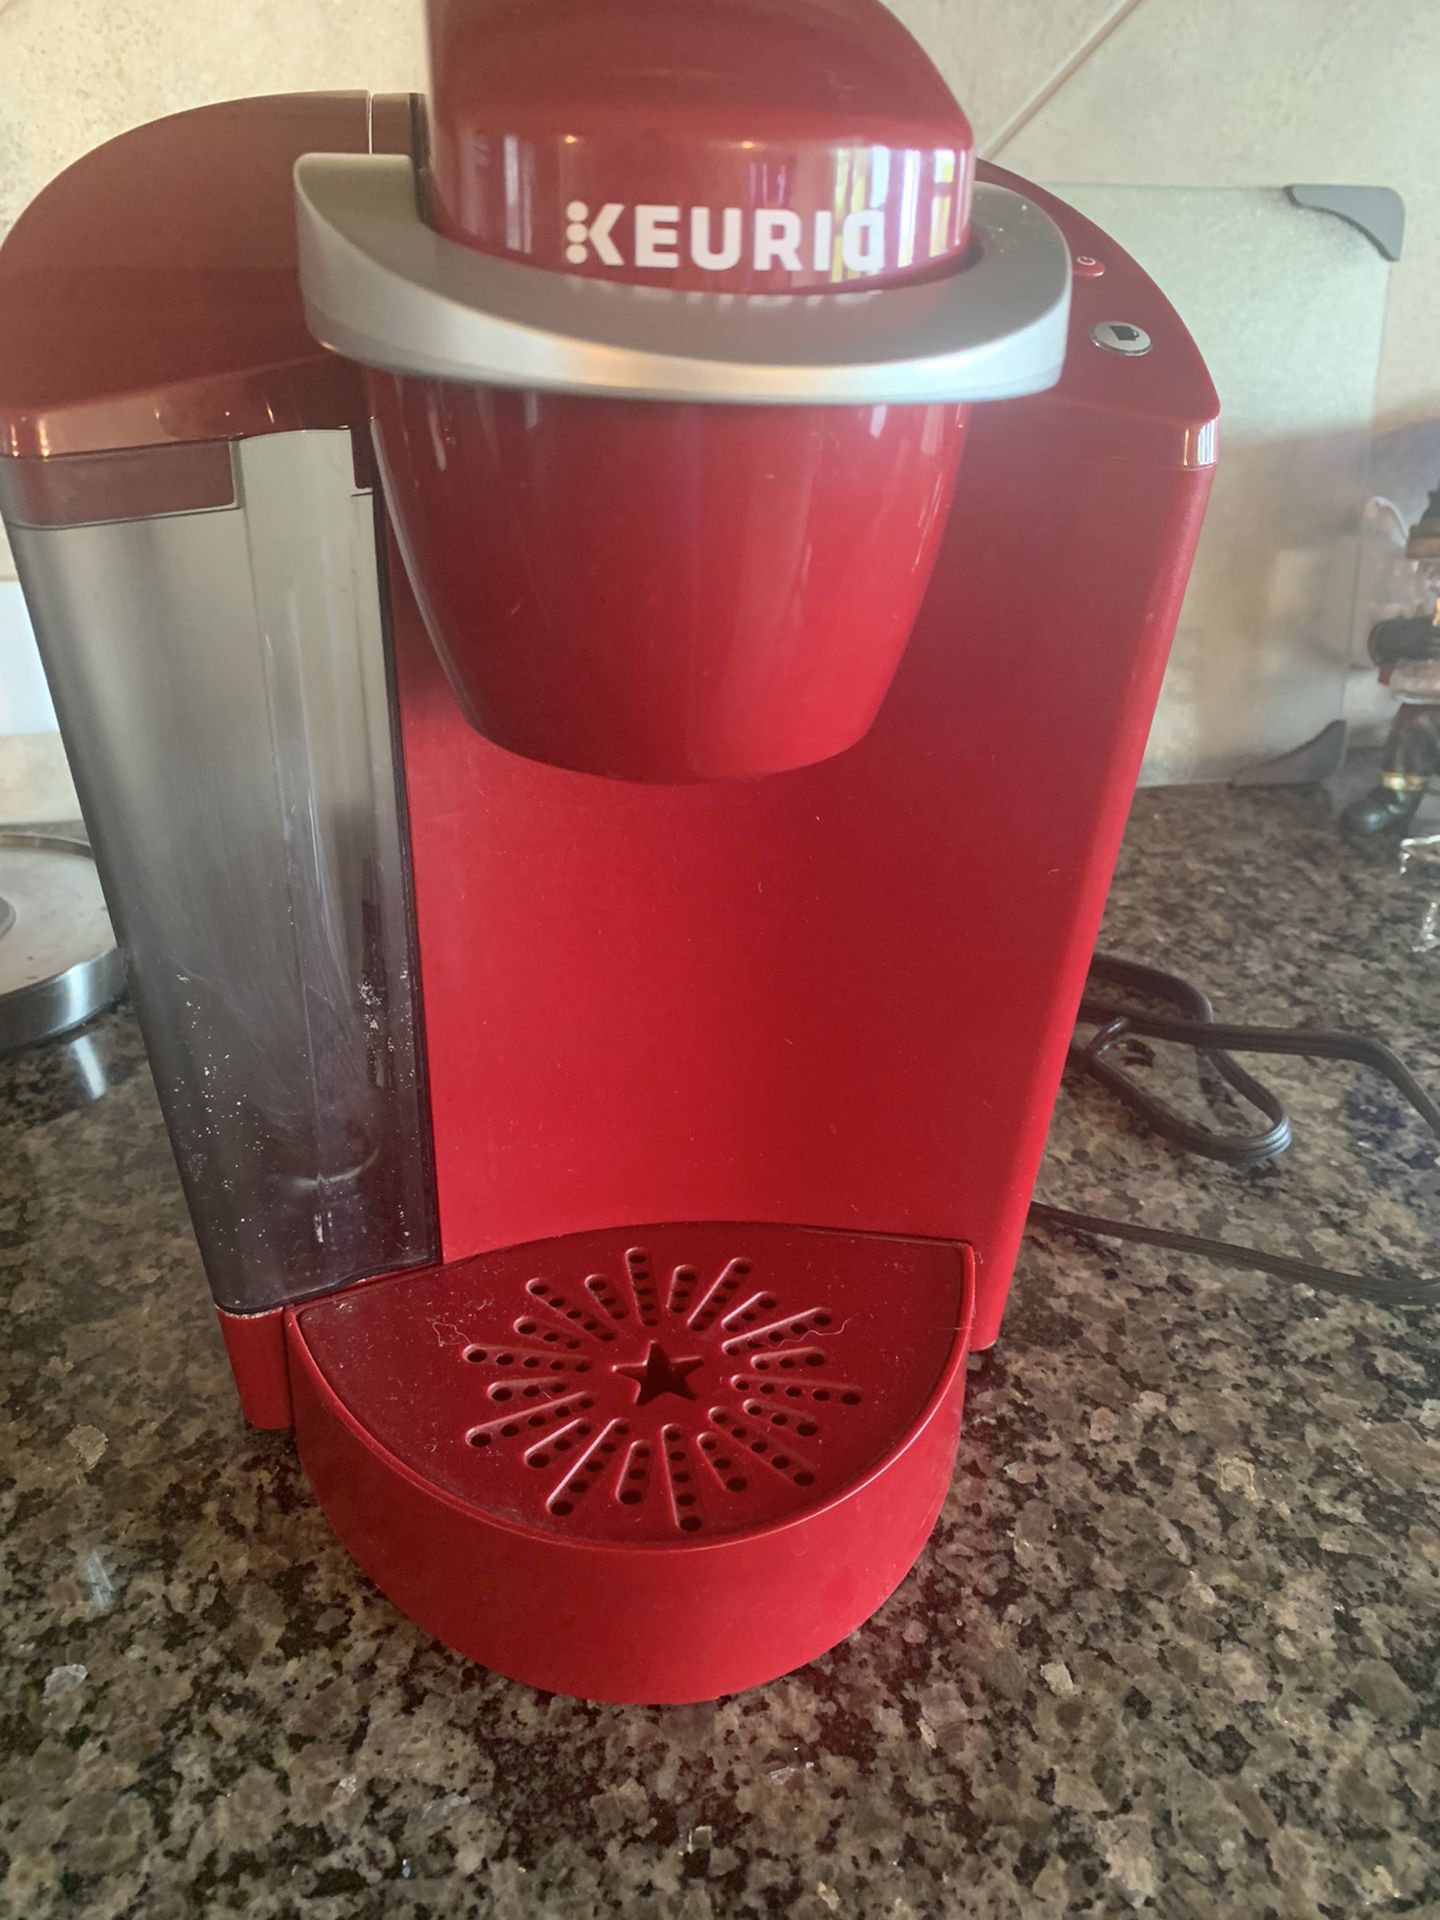 Almost new Keurig Coffee Maker. In GREAT condition!